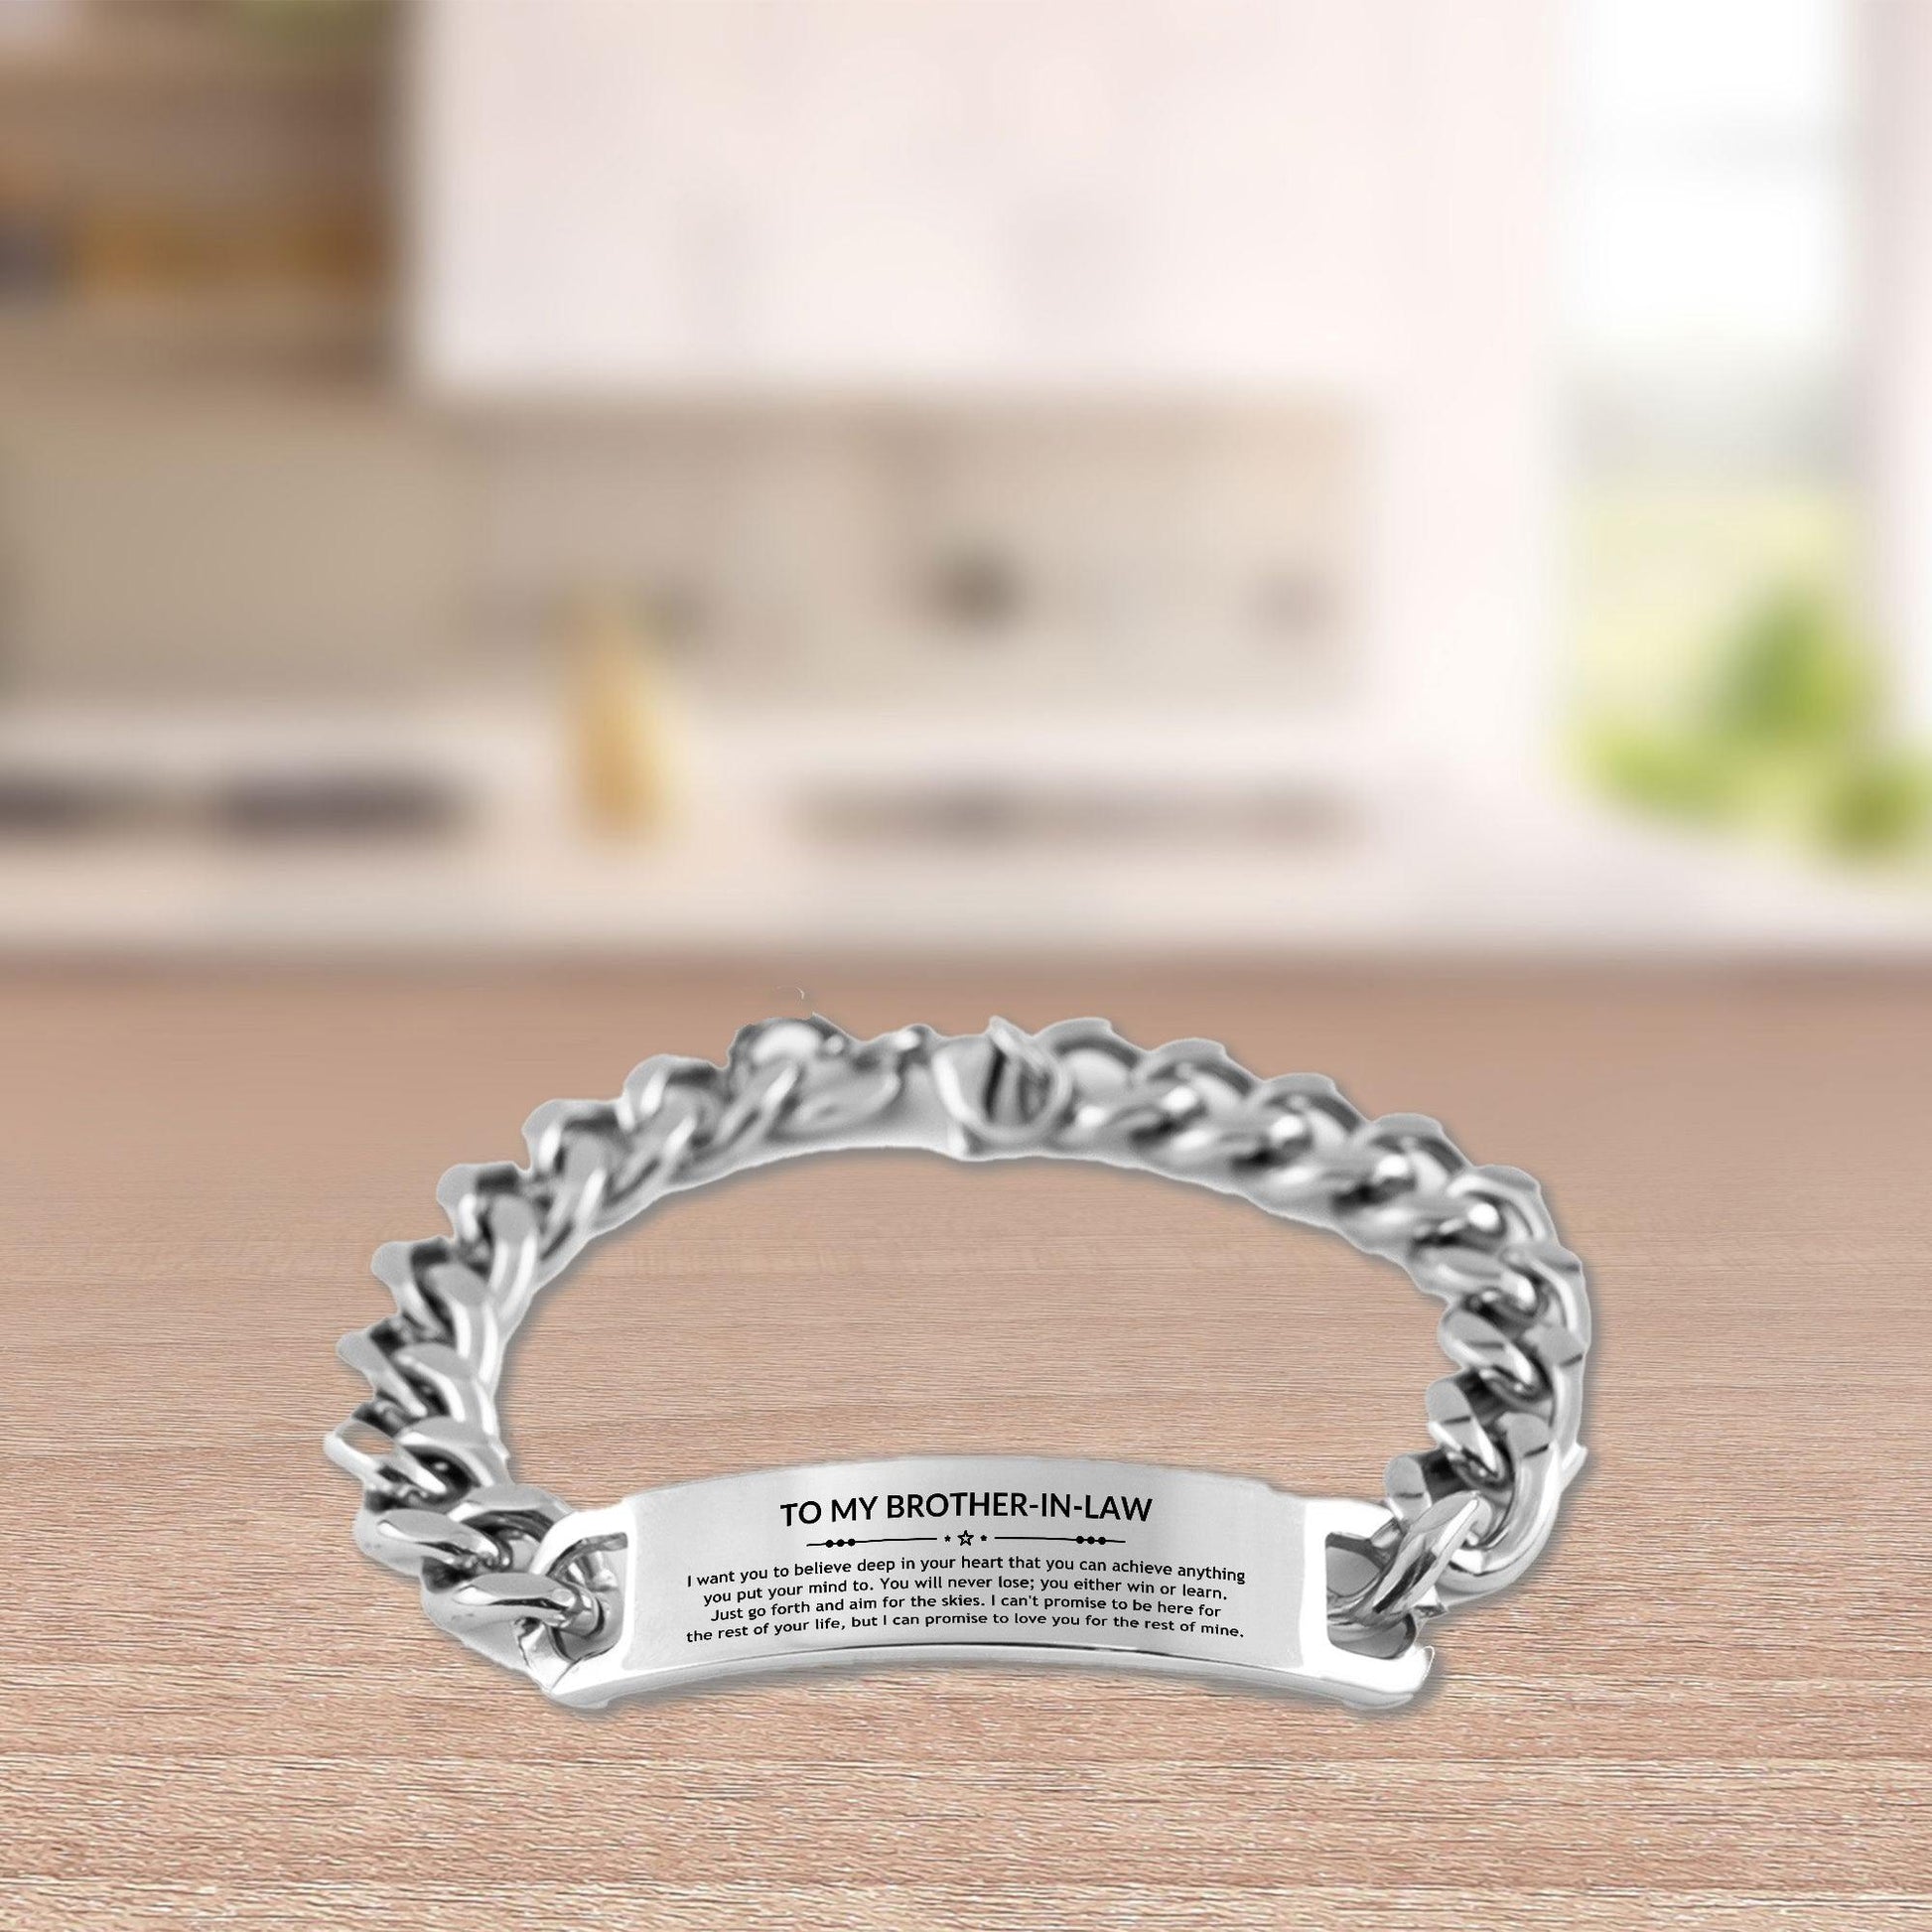 Motivational Brother-in-law Cuban Chain Stainless Steel Bracelet, Brother In Law I can promise to love you for the rest of mine, Christmas, Birthday Jewelry Gift - Mallard Moon Gift Shop